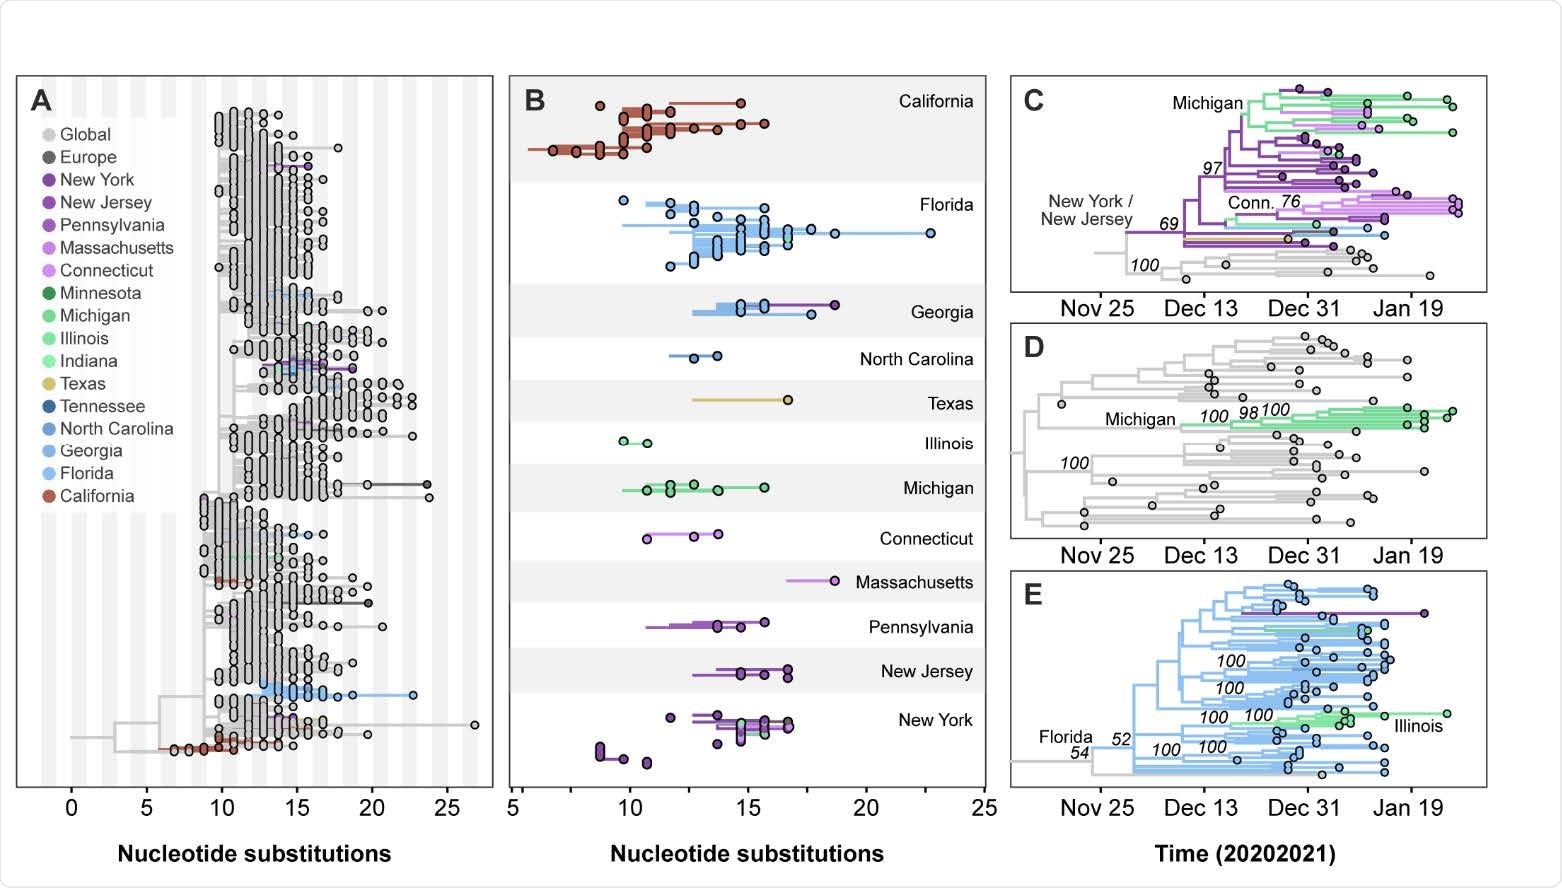 Multiple introductions, domestic spread, and community transmission of B.1.1.7 SARS-CoV-2 in the United States. A. Maximum likelihood phylogeny of B.1.1.7, including representative genomes from the US, Europe, other global locations. B. Highlights of singletons and clades representing direct introductions of B.1.1.7 from Europe, into distinct regions of the US, based on the same phylogenetic tree shown in (A). A list of the Europe to US transitions can be found in Data S1. C-E. Time-informed maximum likelihood phylogeny of distinct B.1.1.7 clades showing instances of domestic spread (C,E) and/or community transmission within New York (C), Connecticut (C), Michigan (C,D), and Illinois (E). The list of SARS-CoV-2 sequences used in this study and author acknowledgements can be found in Data S2.